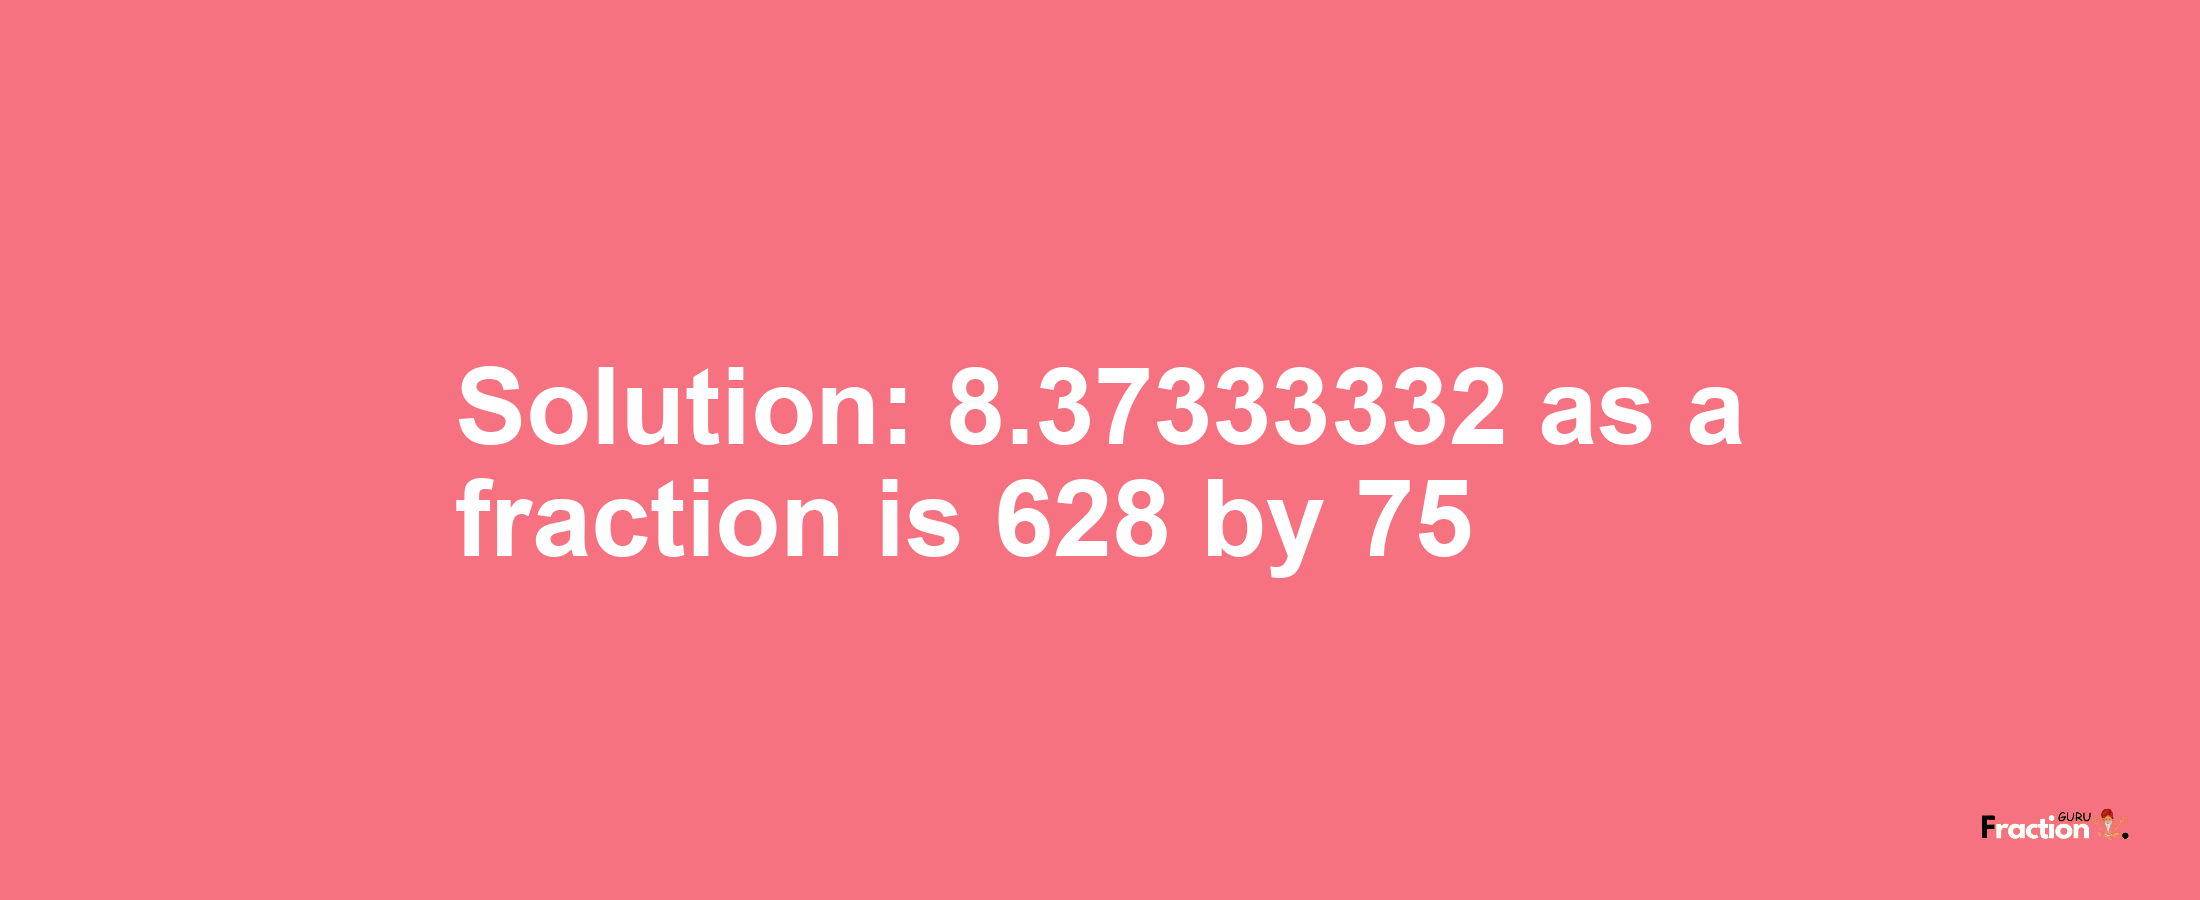 Solution:8.37333332 as a fraction is 628/75